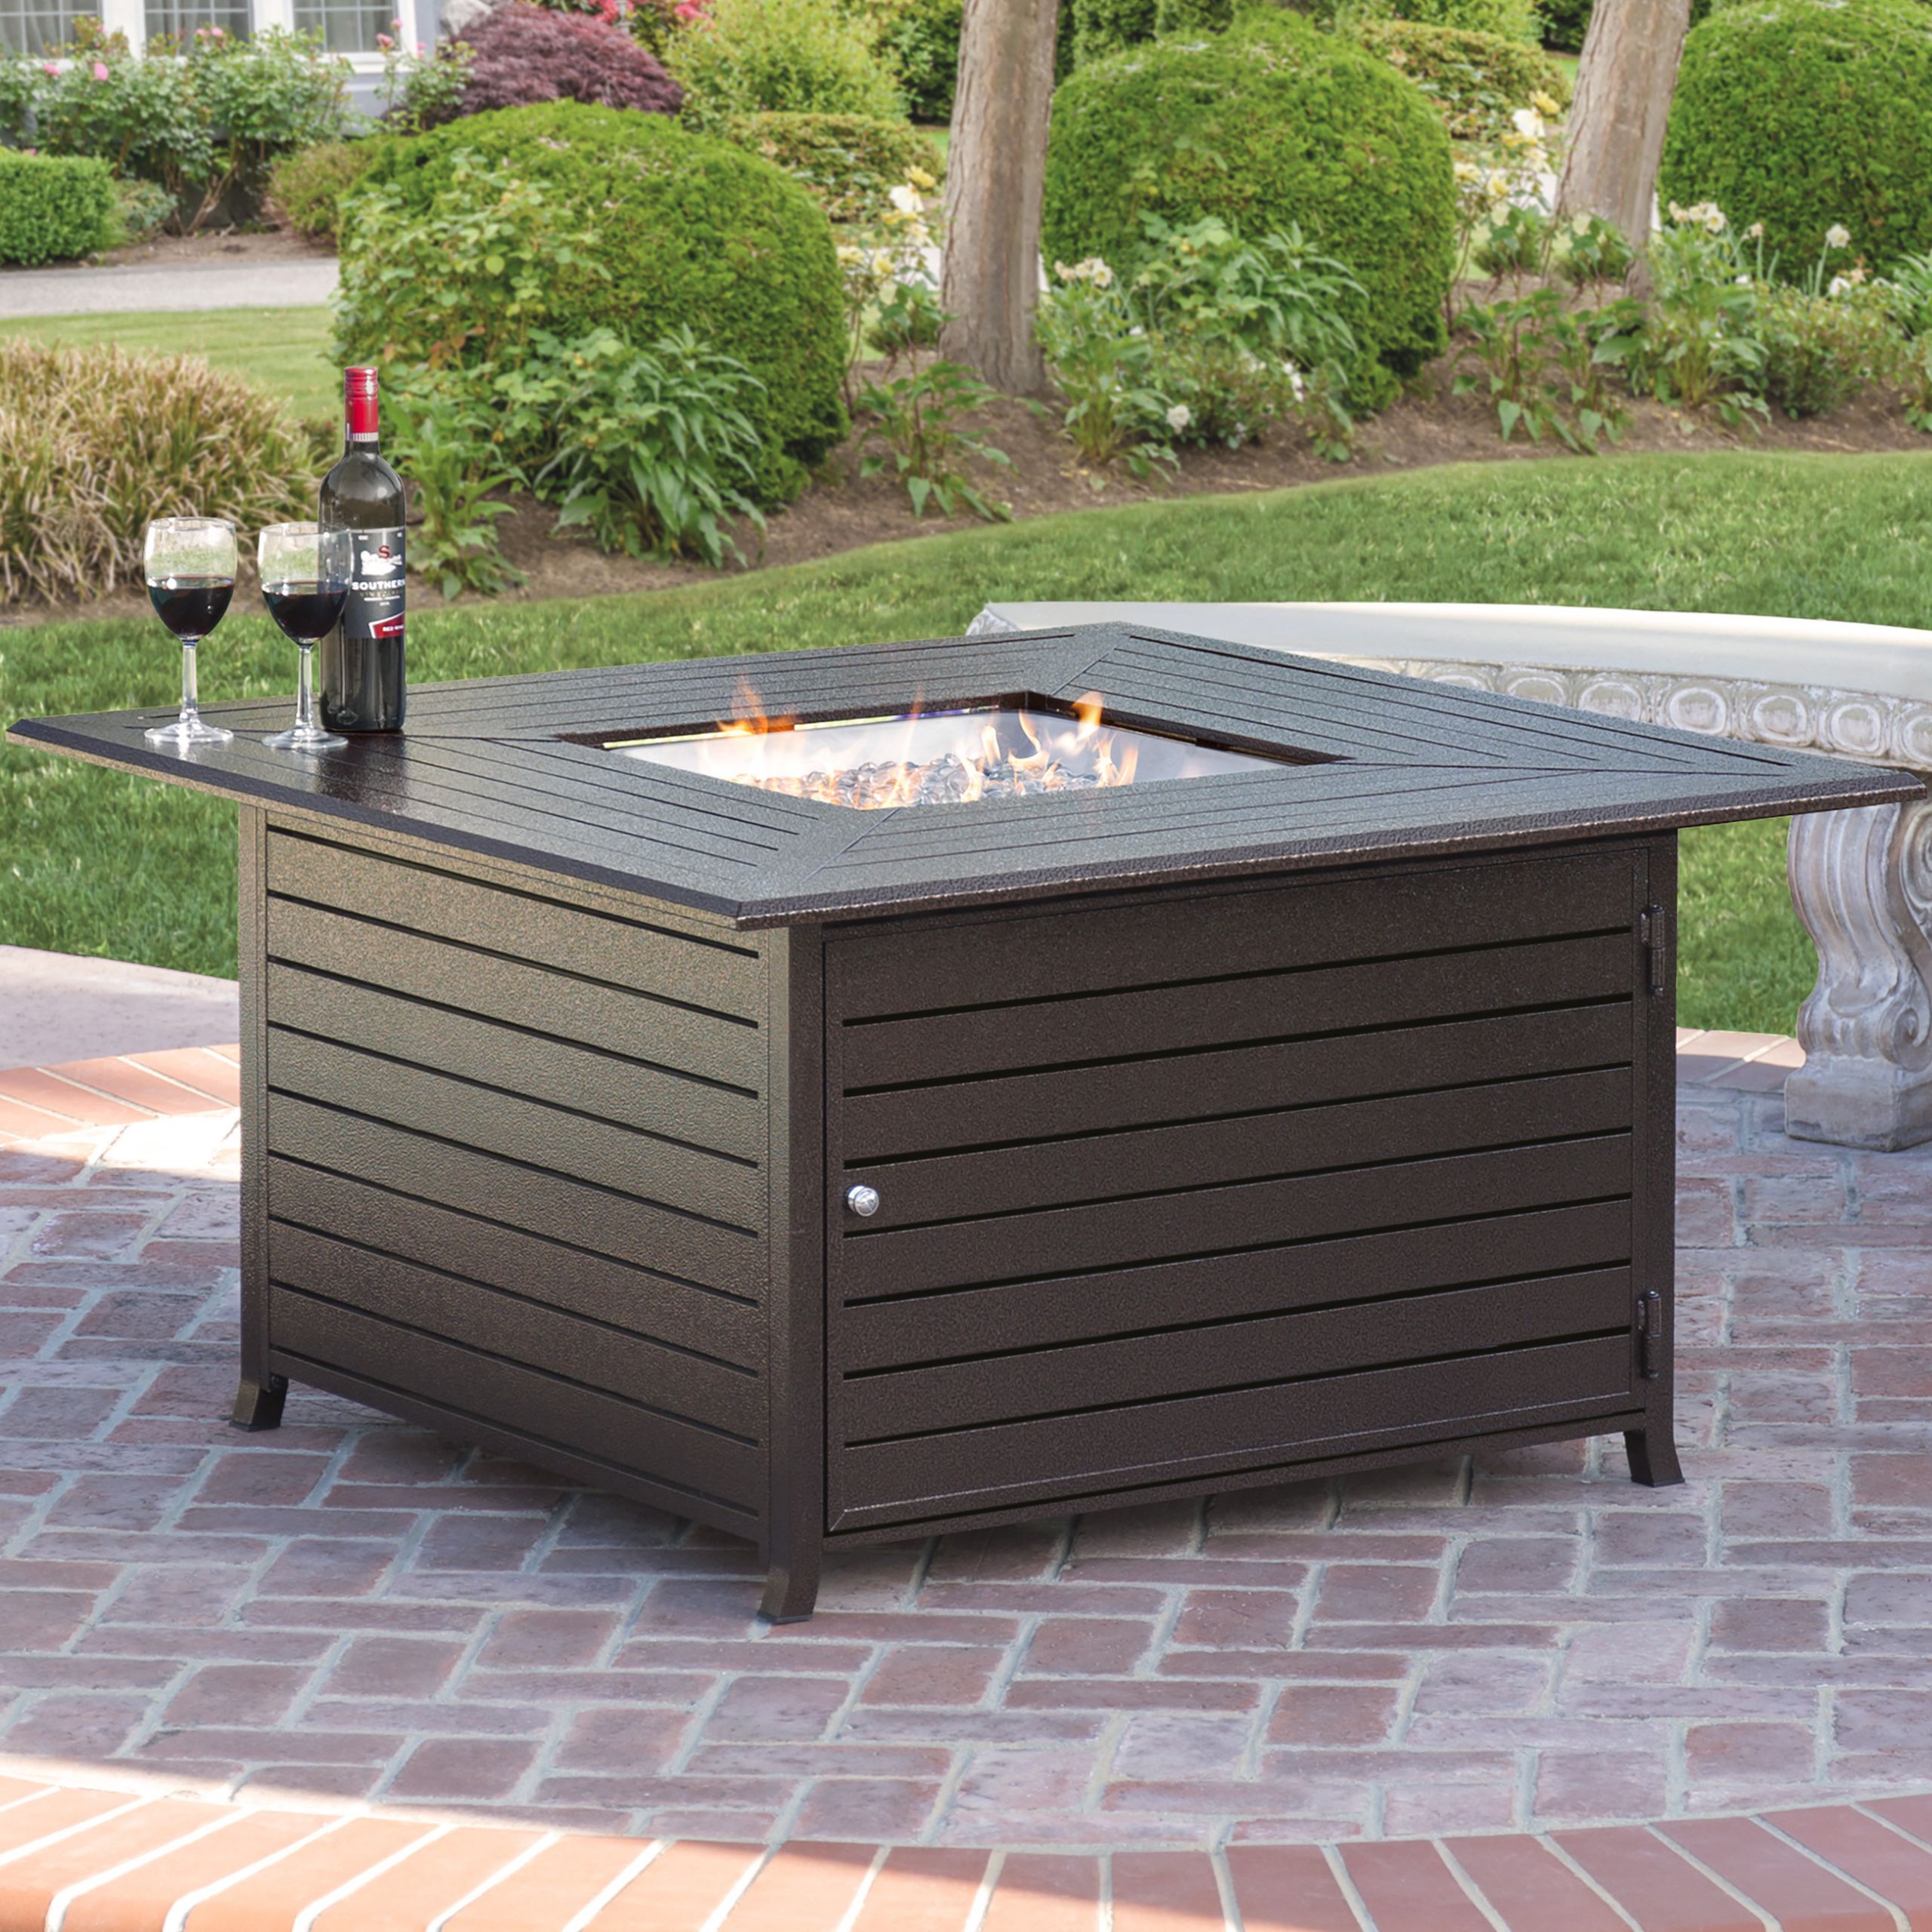 Firepit Patio Table
 Best Choice Products Extruded Aluminum Gas Outdoor Fire